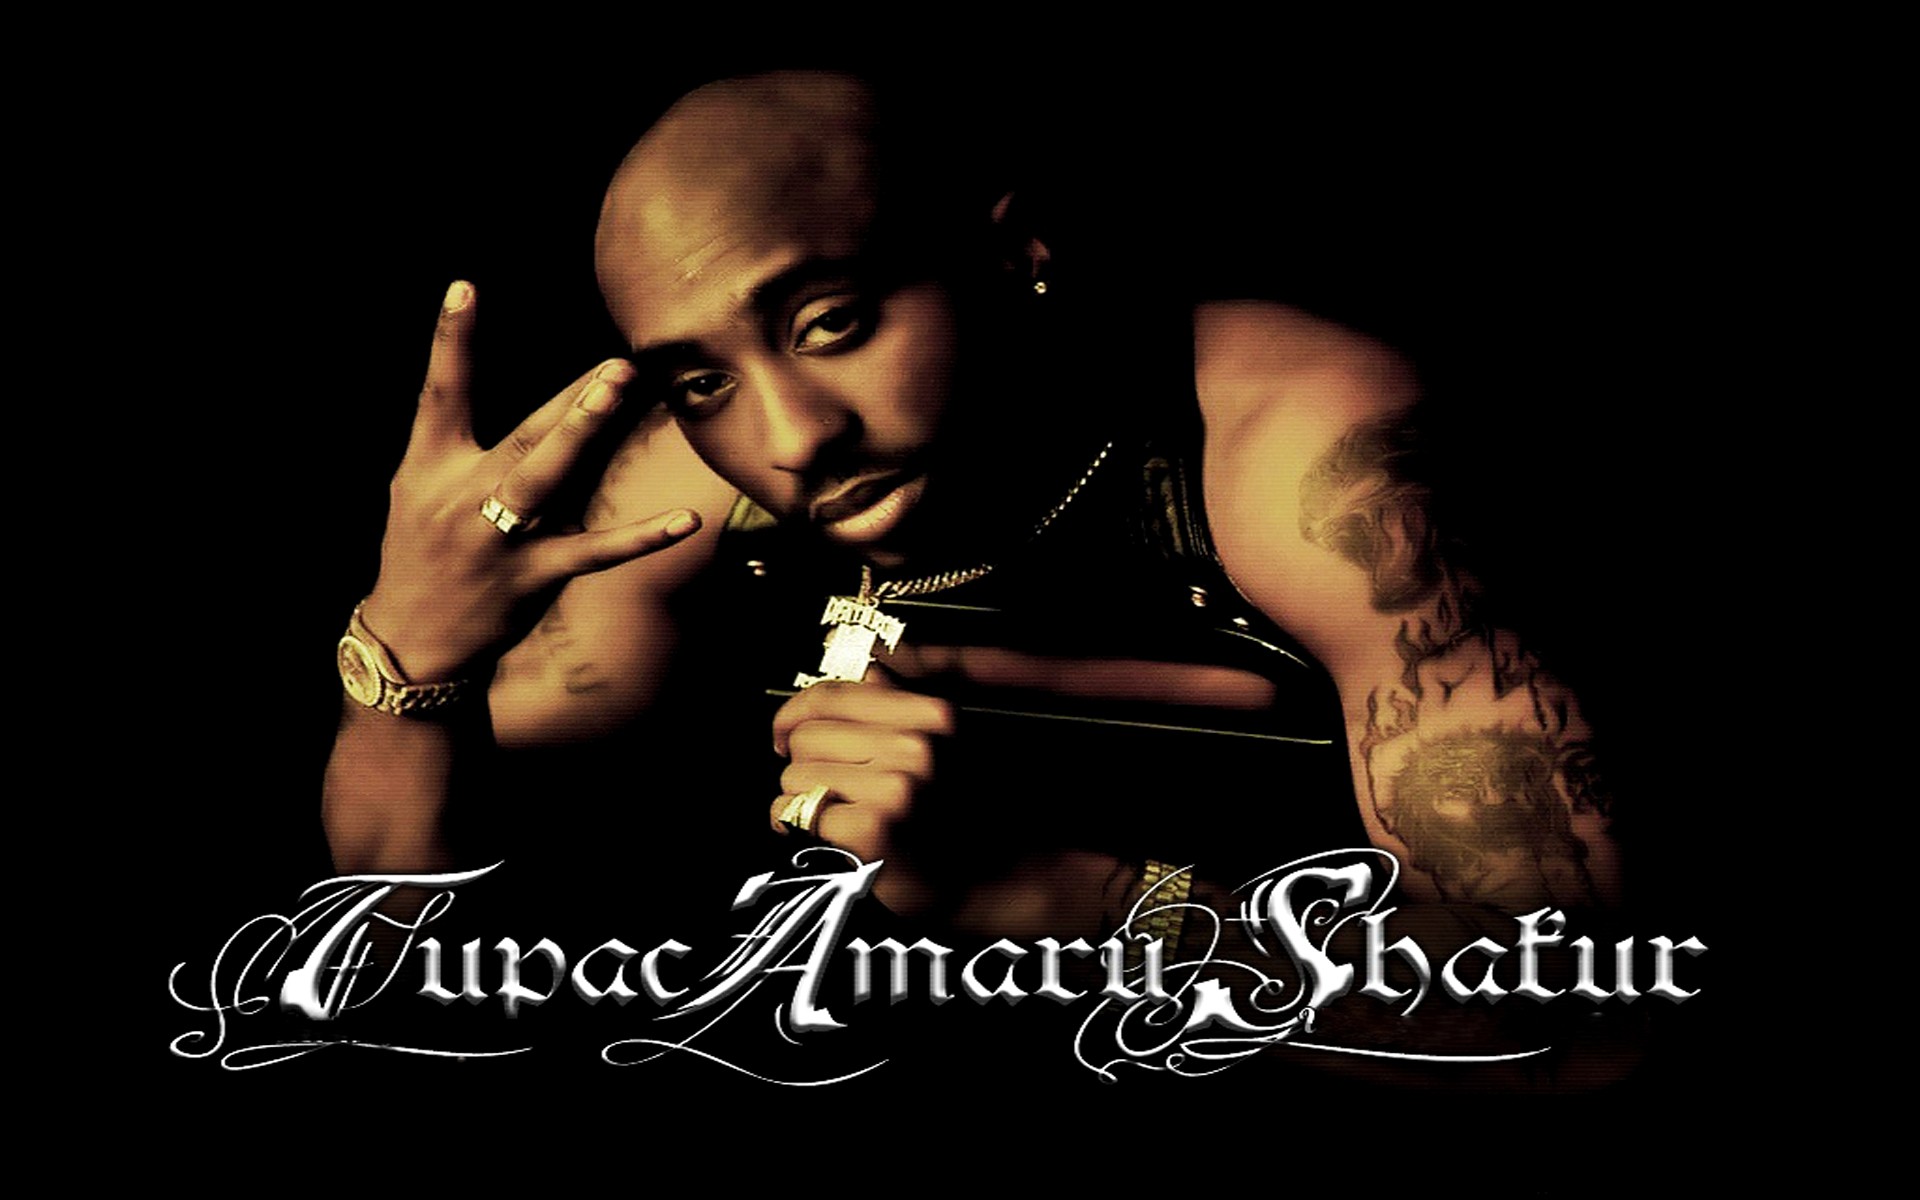 Download A Dream Fulfilled 2Pac and Biggie in 1997 Wallpaper  Wallpapers com